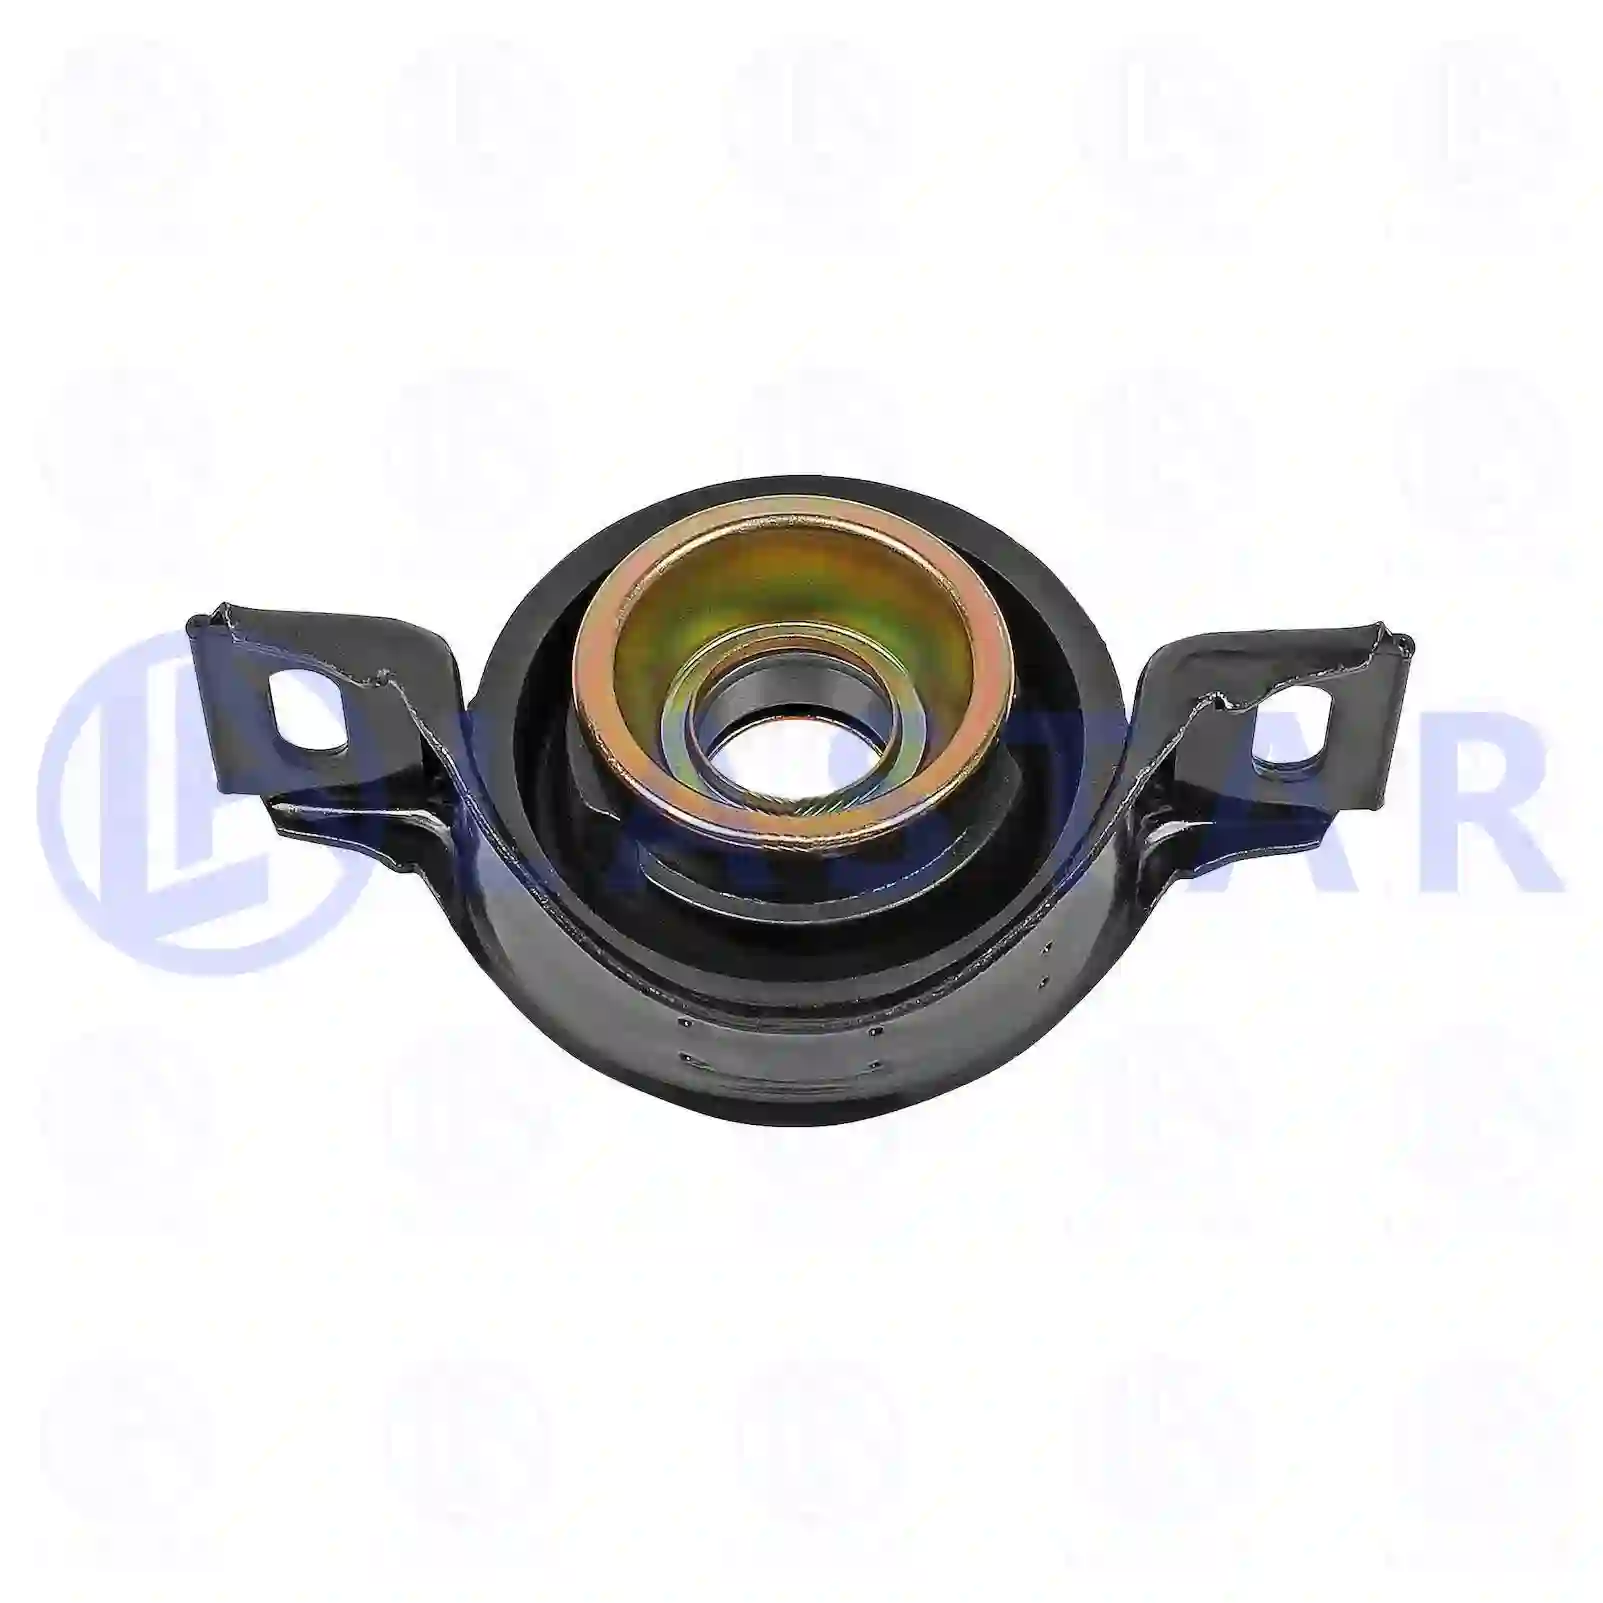 Center bearing, 77734268, 5154100082, 6394100081, 6394100481 ||  77734268 Lastar Spare Part | Truck Spare Parts, Auotomotive Spare Parts Center bearing, 77734268, 5154100082, 6394100081, 6394100481 ||  77734268 Lastar Spare Part | Truck Spare Parts, Auotomotive Spare Parts